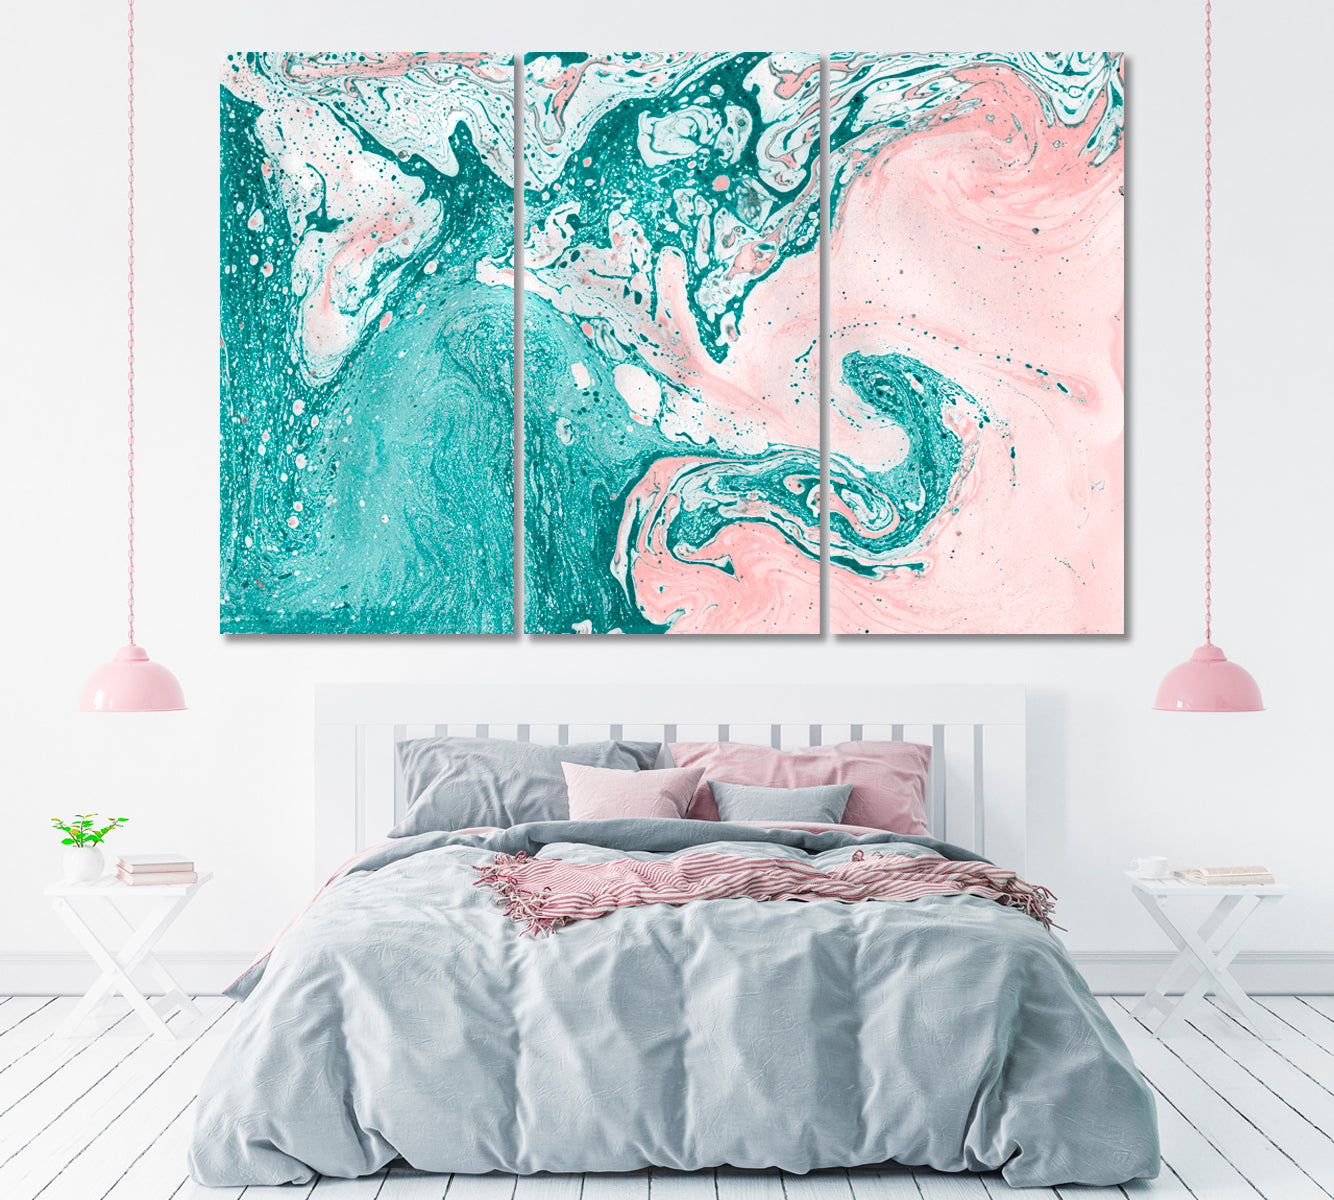 Abstract Turquoise and Pink Marble Painting Canvas Print ArtLexy 3 Panels 36"x24" inches 